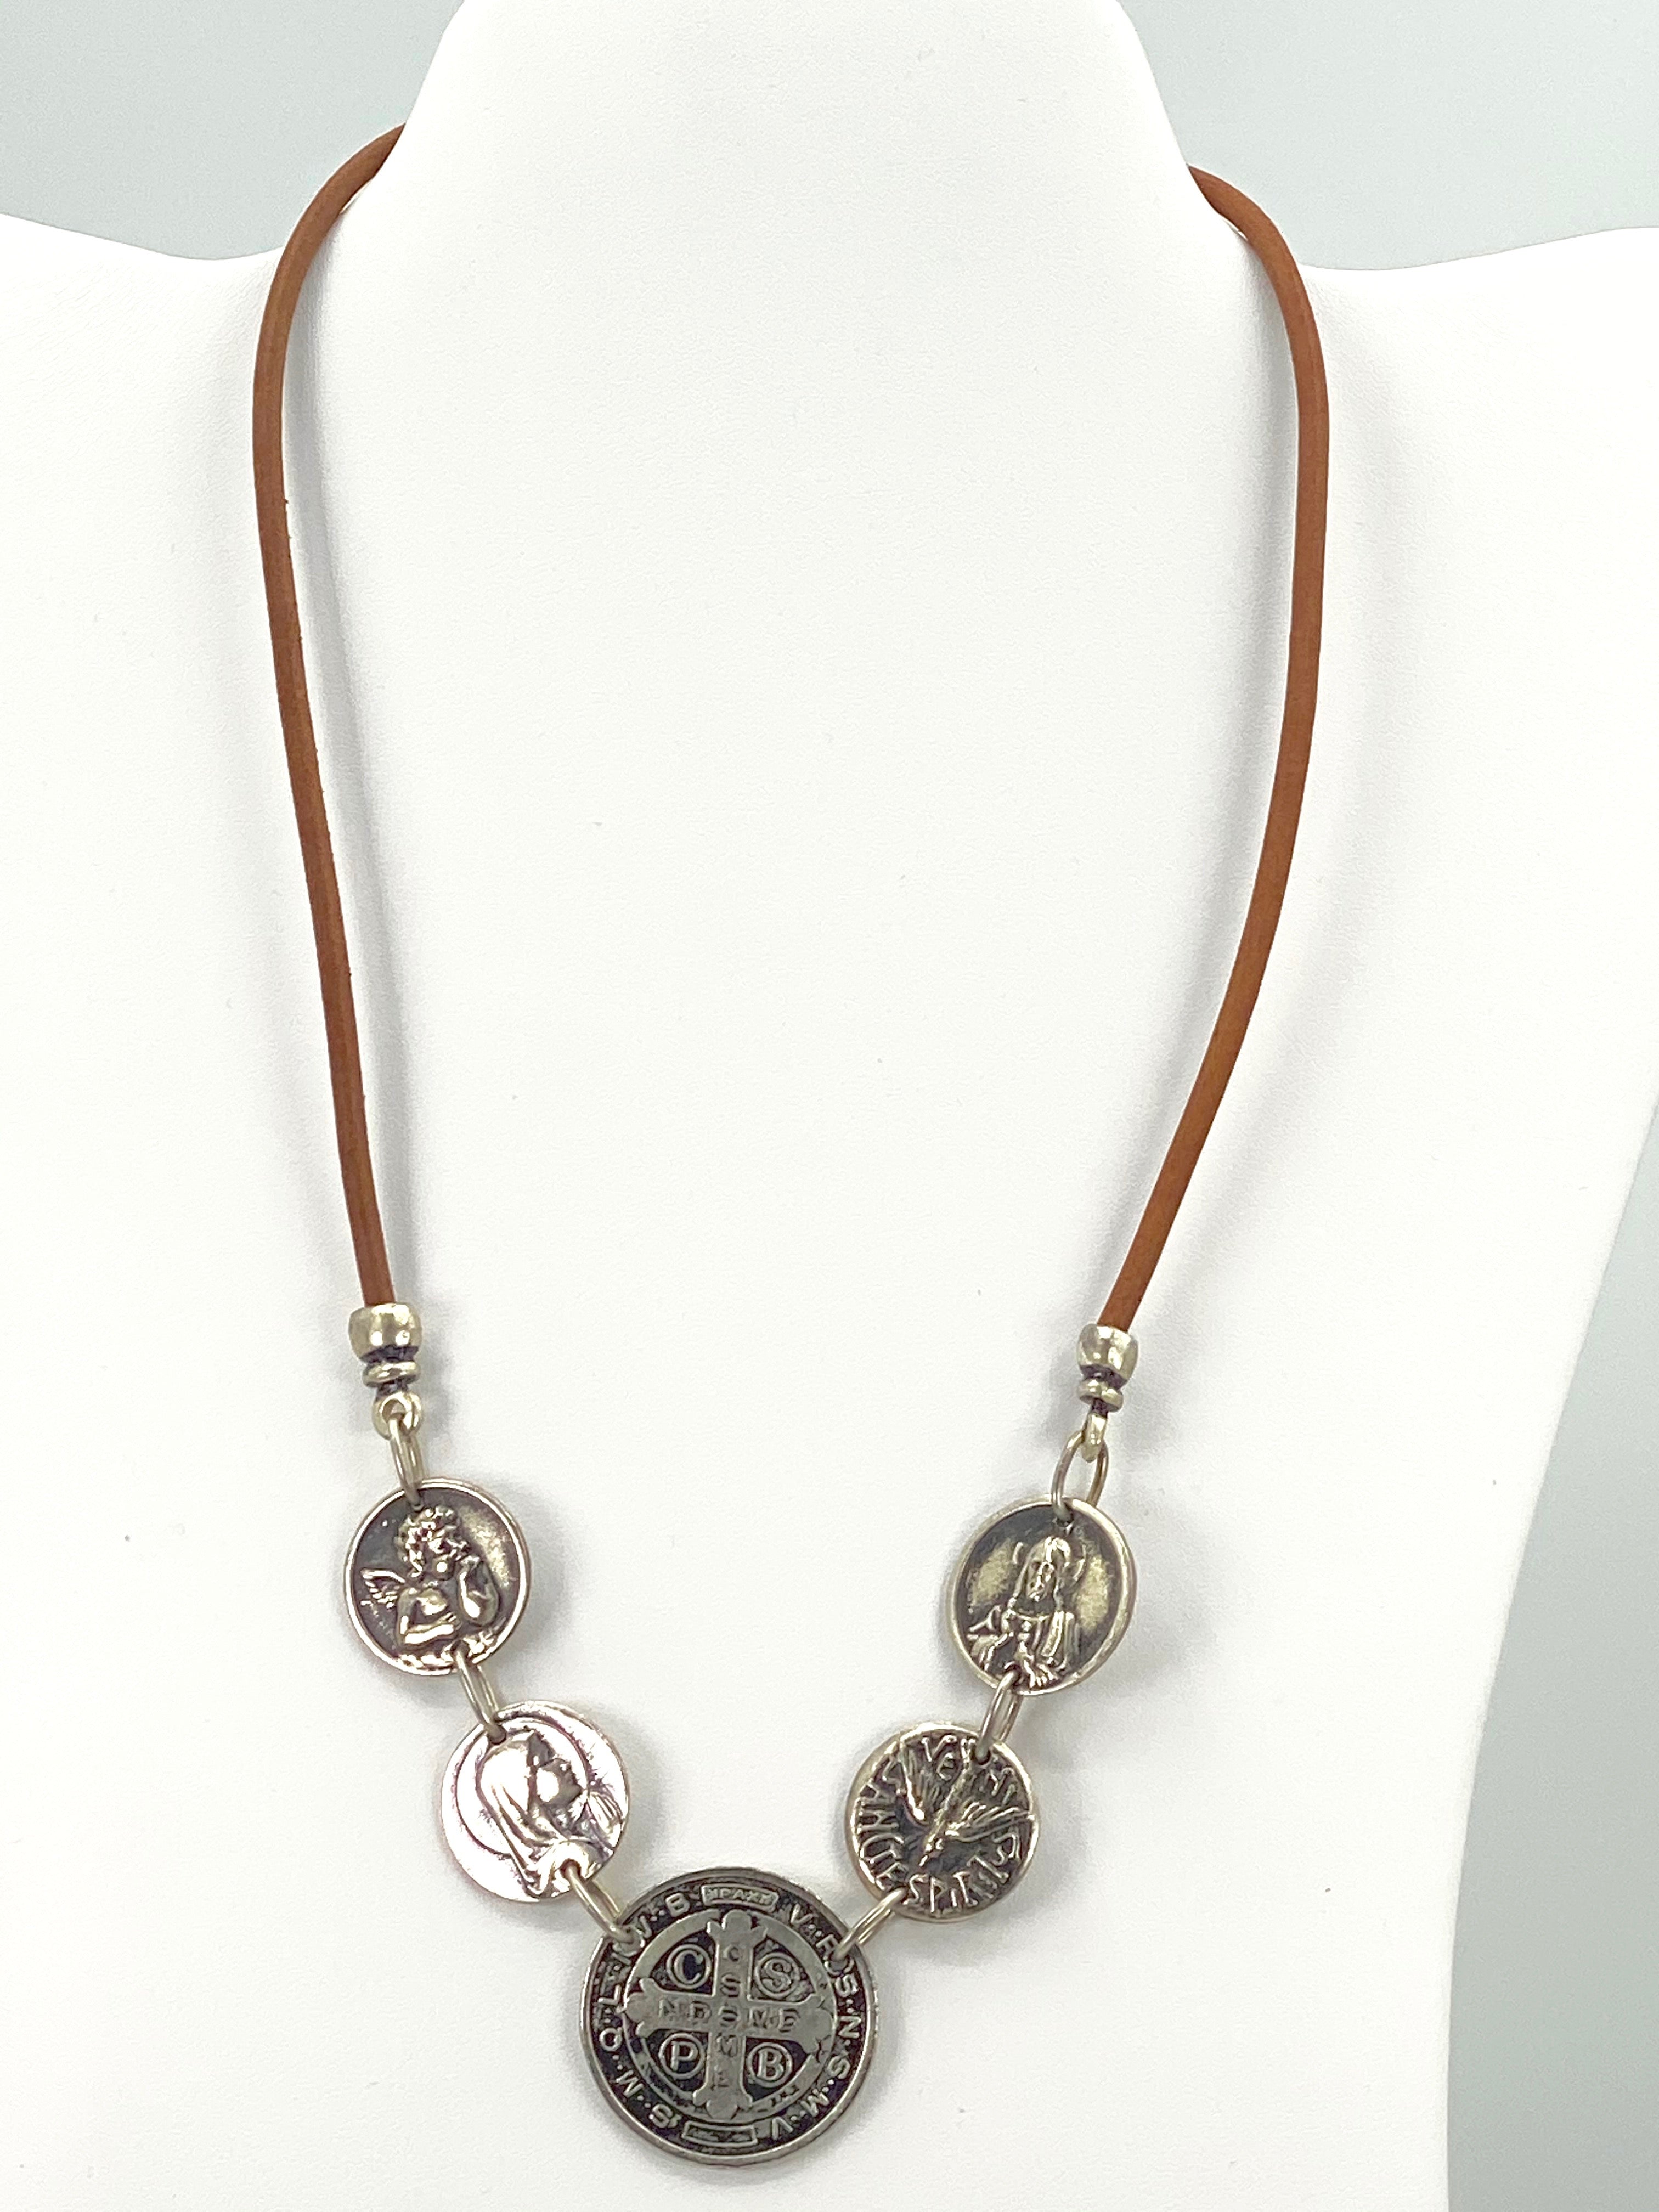 Vintage Necklace of St. Benedict, Virgin Mary, Sacred Heart of Jesus, Holy Spirit and Guardian Angel - Handmade Jewelry with Genuine Leather Strap by Graciela's Collection